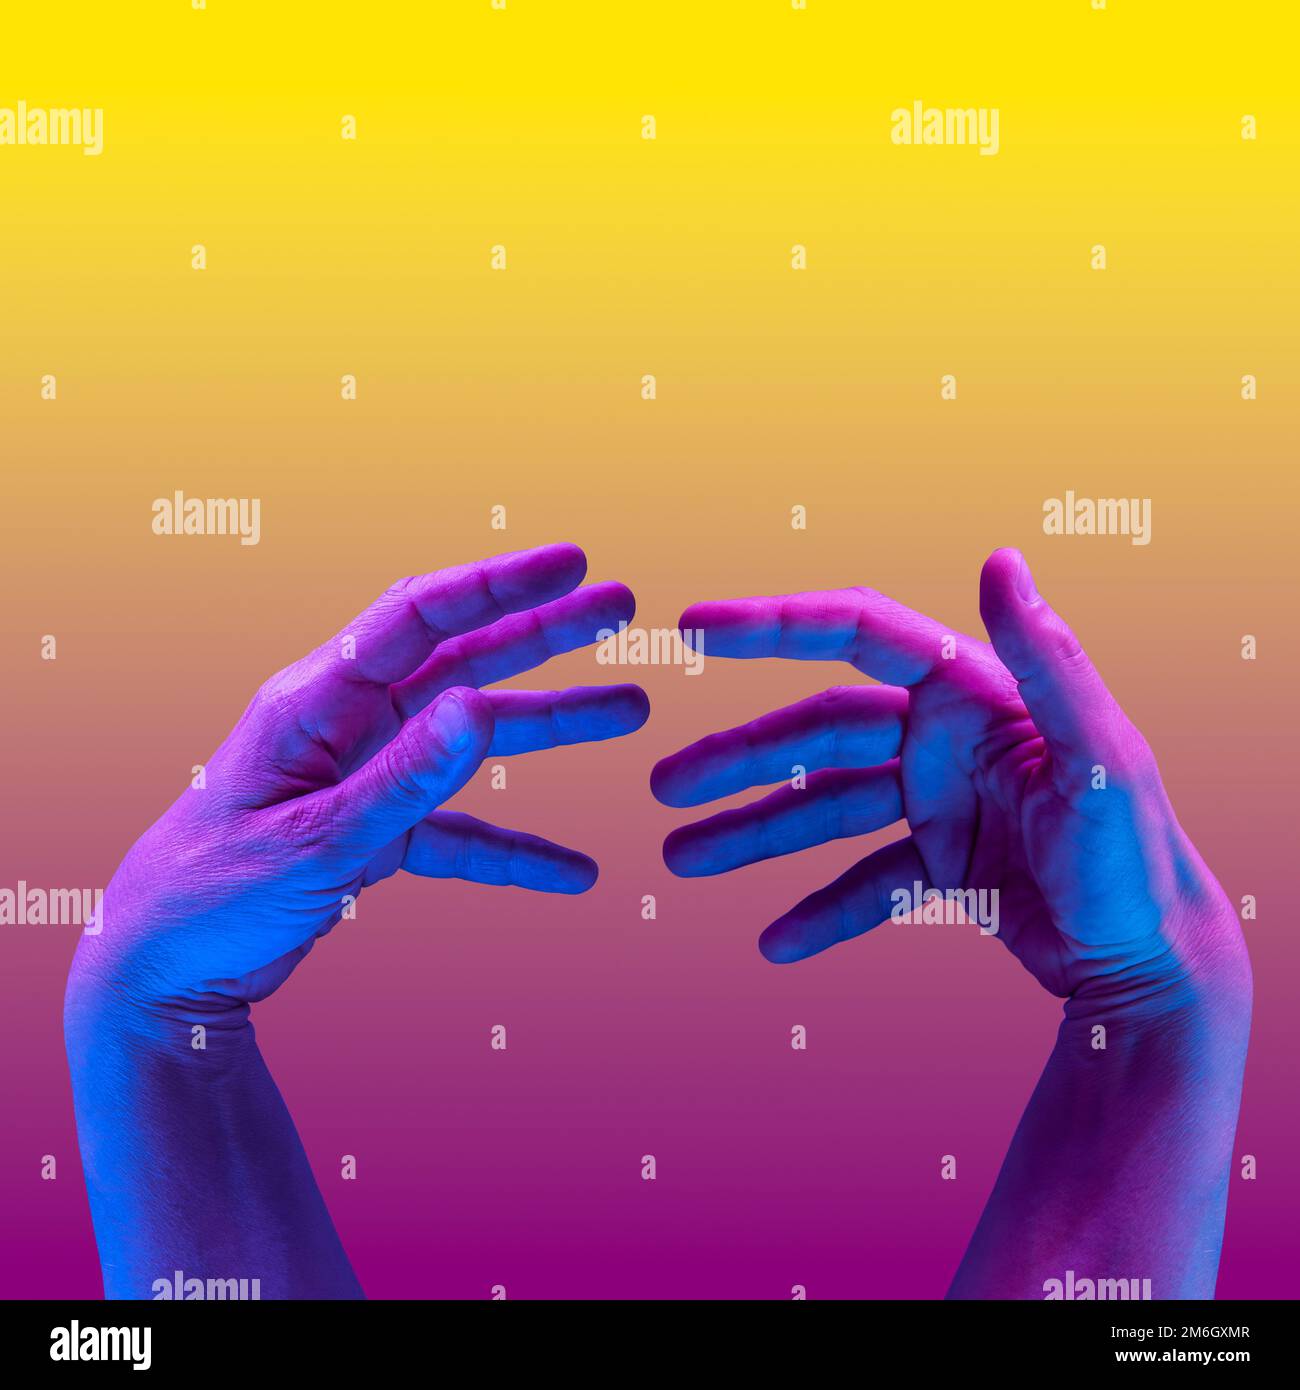 Hands in a surreal style in violet blue neon colors. Modern psychedelic creative element with human palm for posters, banners, w Stock Photo